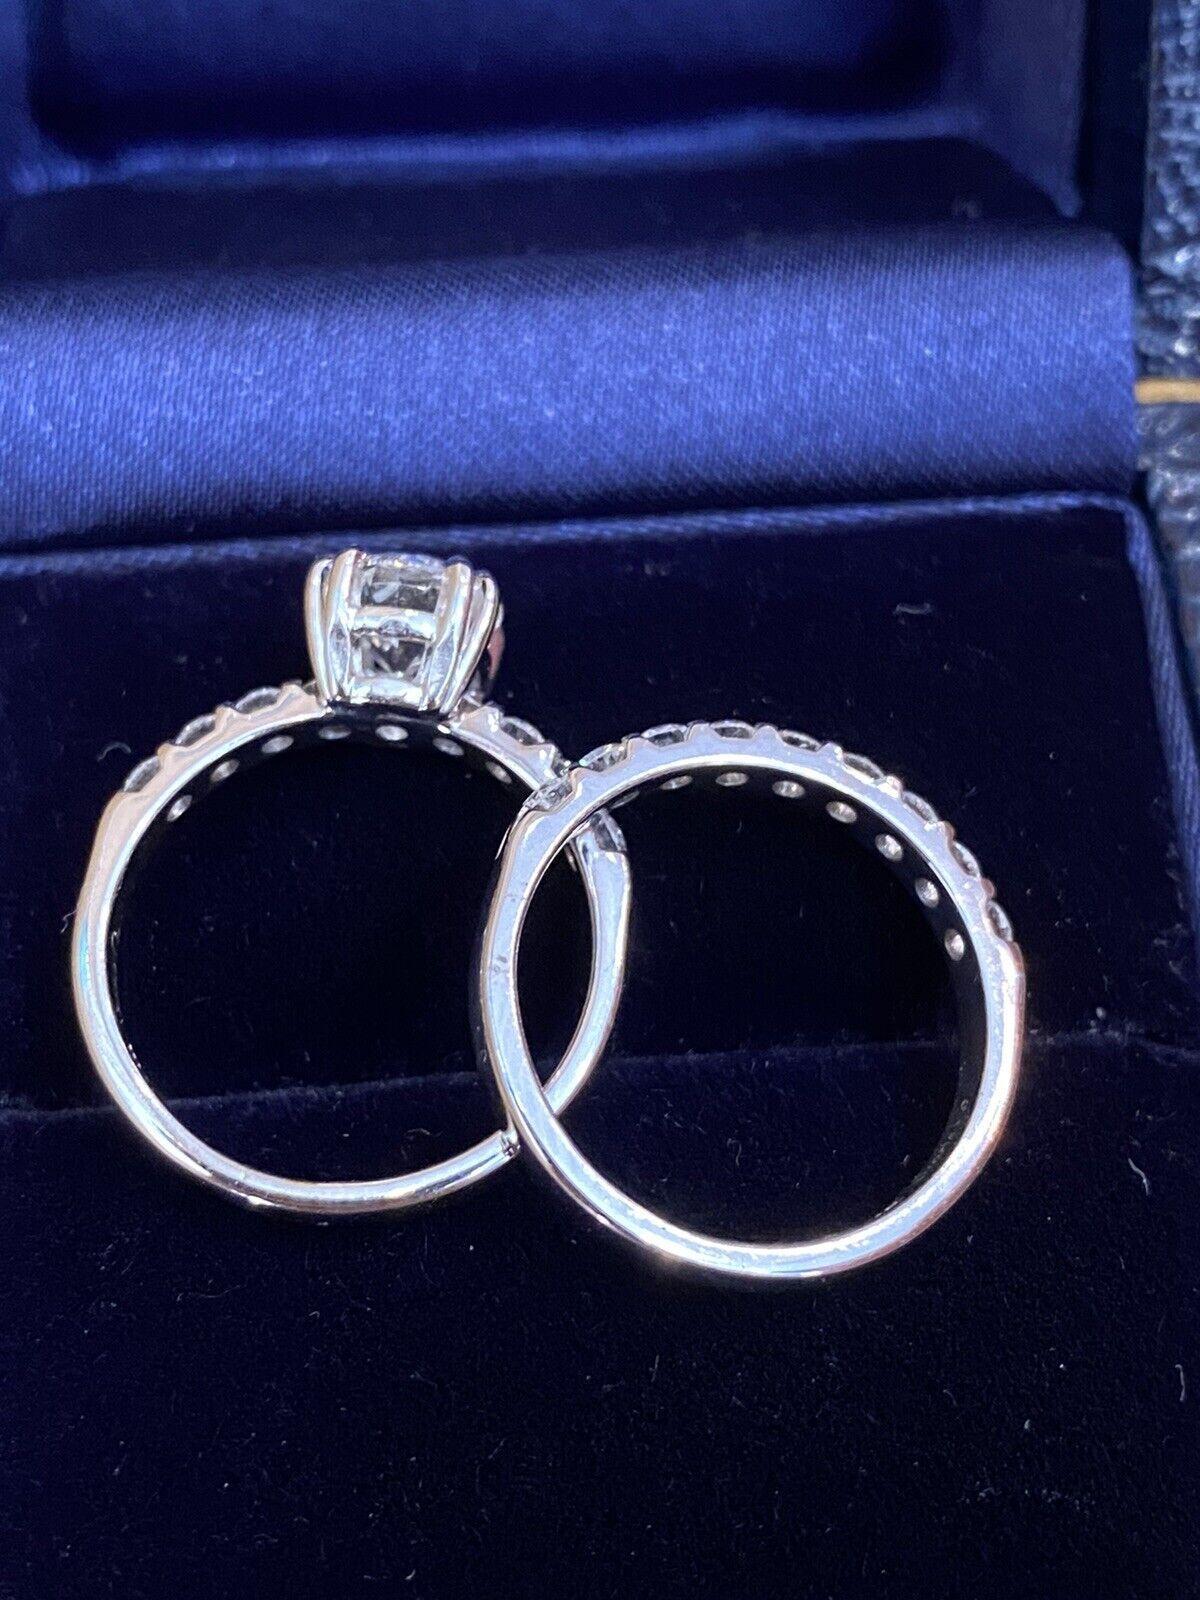 GIA 1.23 Carat Engagement Diamond Ring Set in 14k White Gold In Excellent Condition For Sale In La Jolla, CA